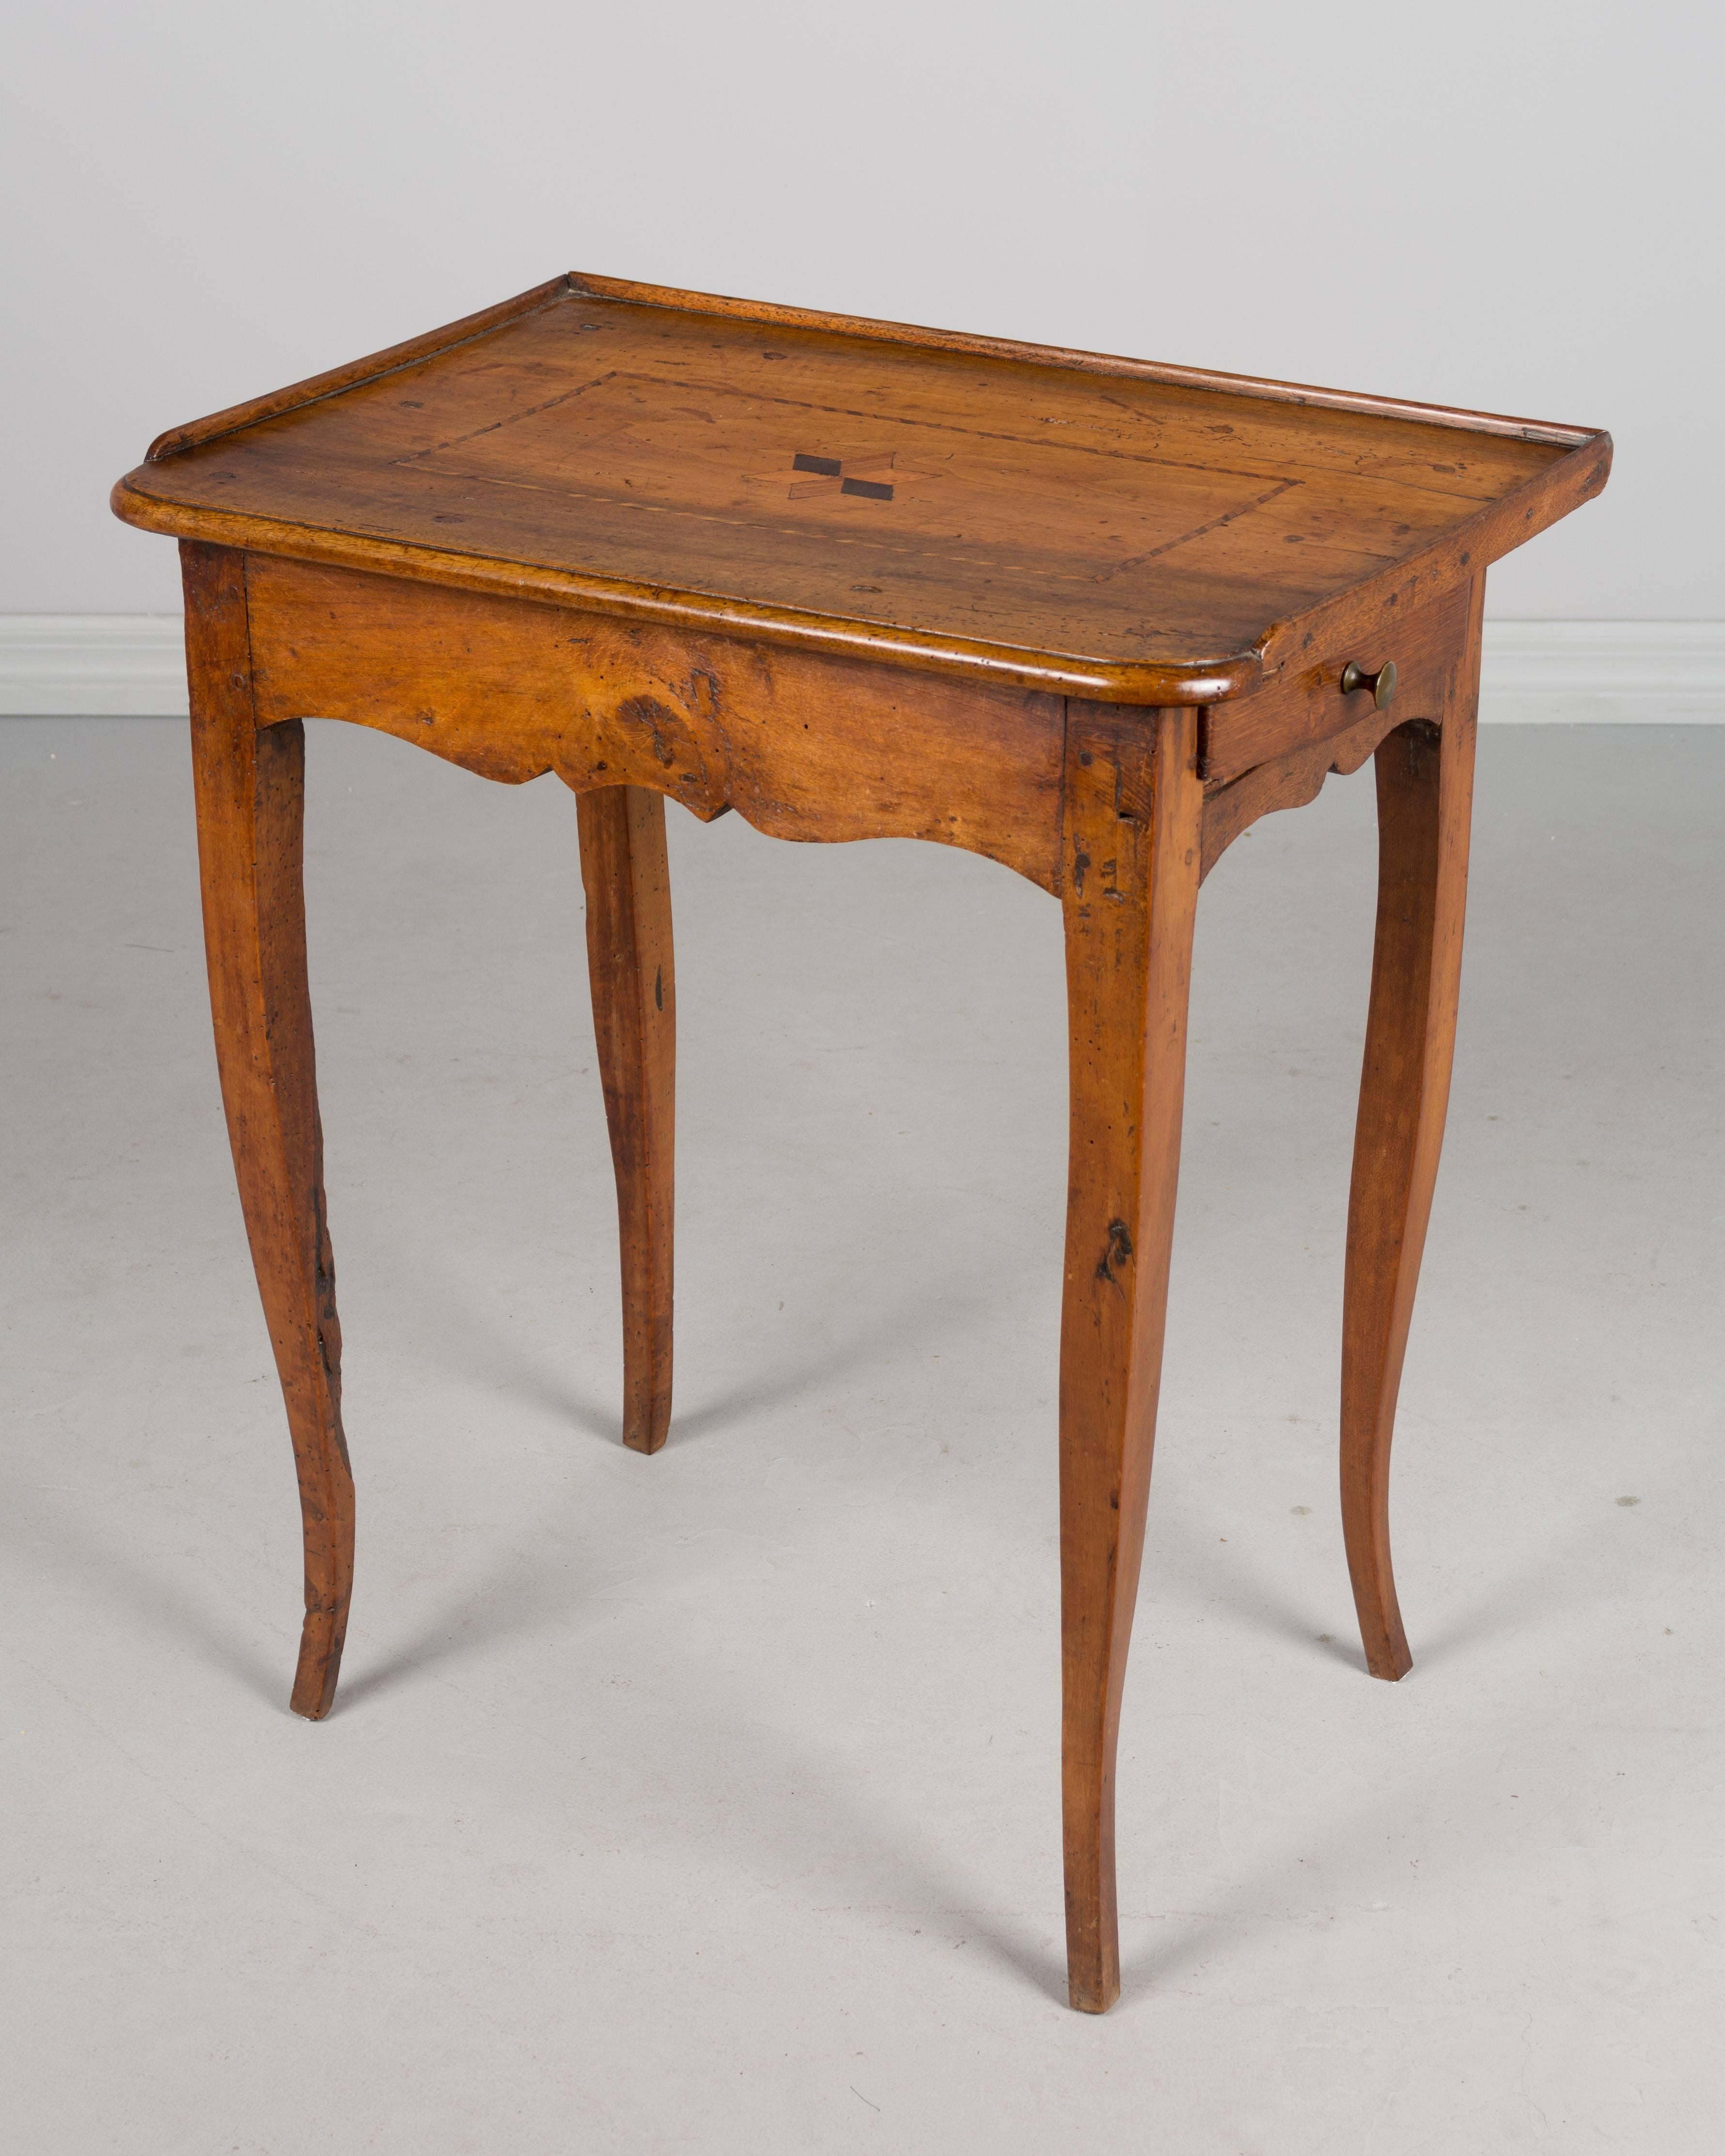 18th century period Louis XV writing or side table made of walnut and oak. Single drawer on right side. Top has simple star inlaid design and curved front corners with wood trim on three sides. Slim curved legs. All original. Waxed patina. The face